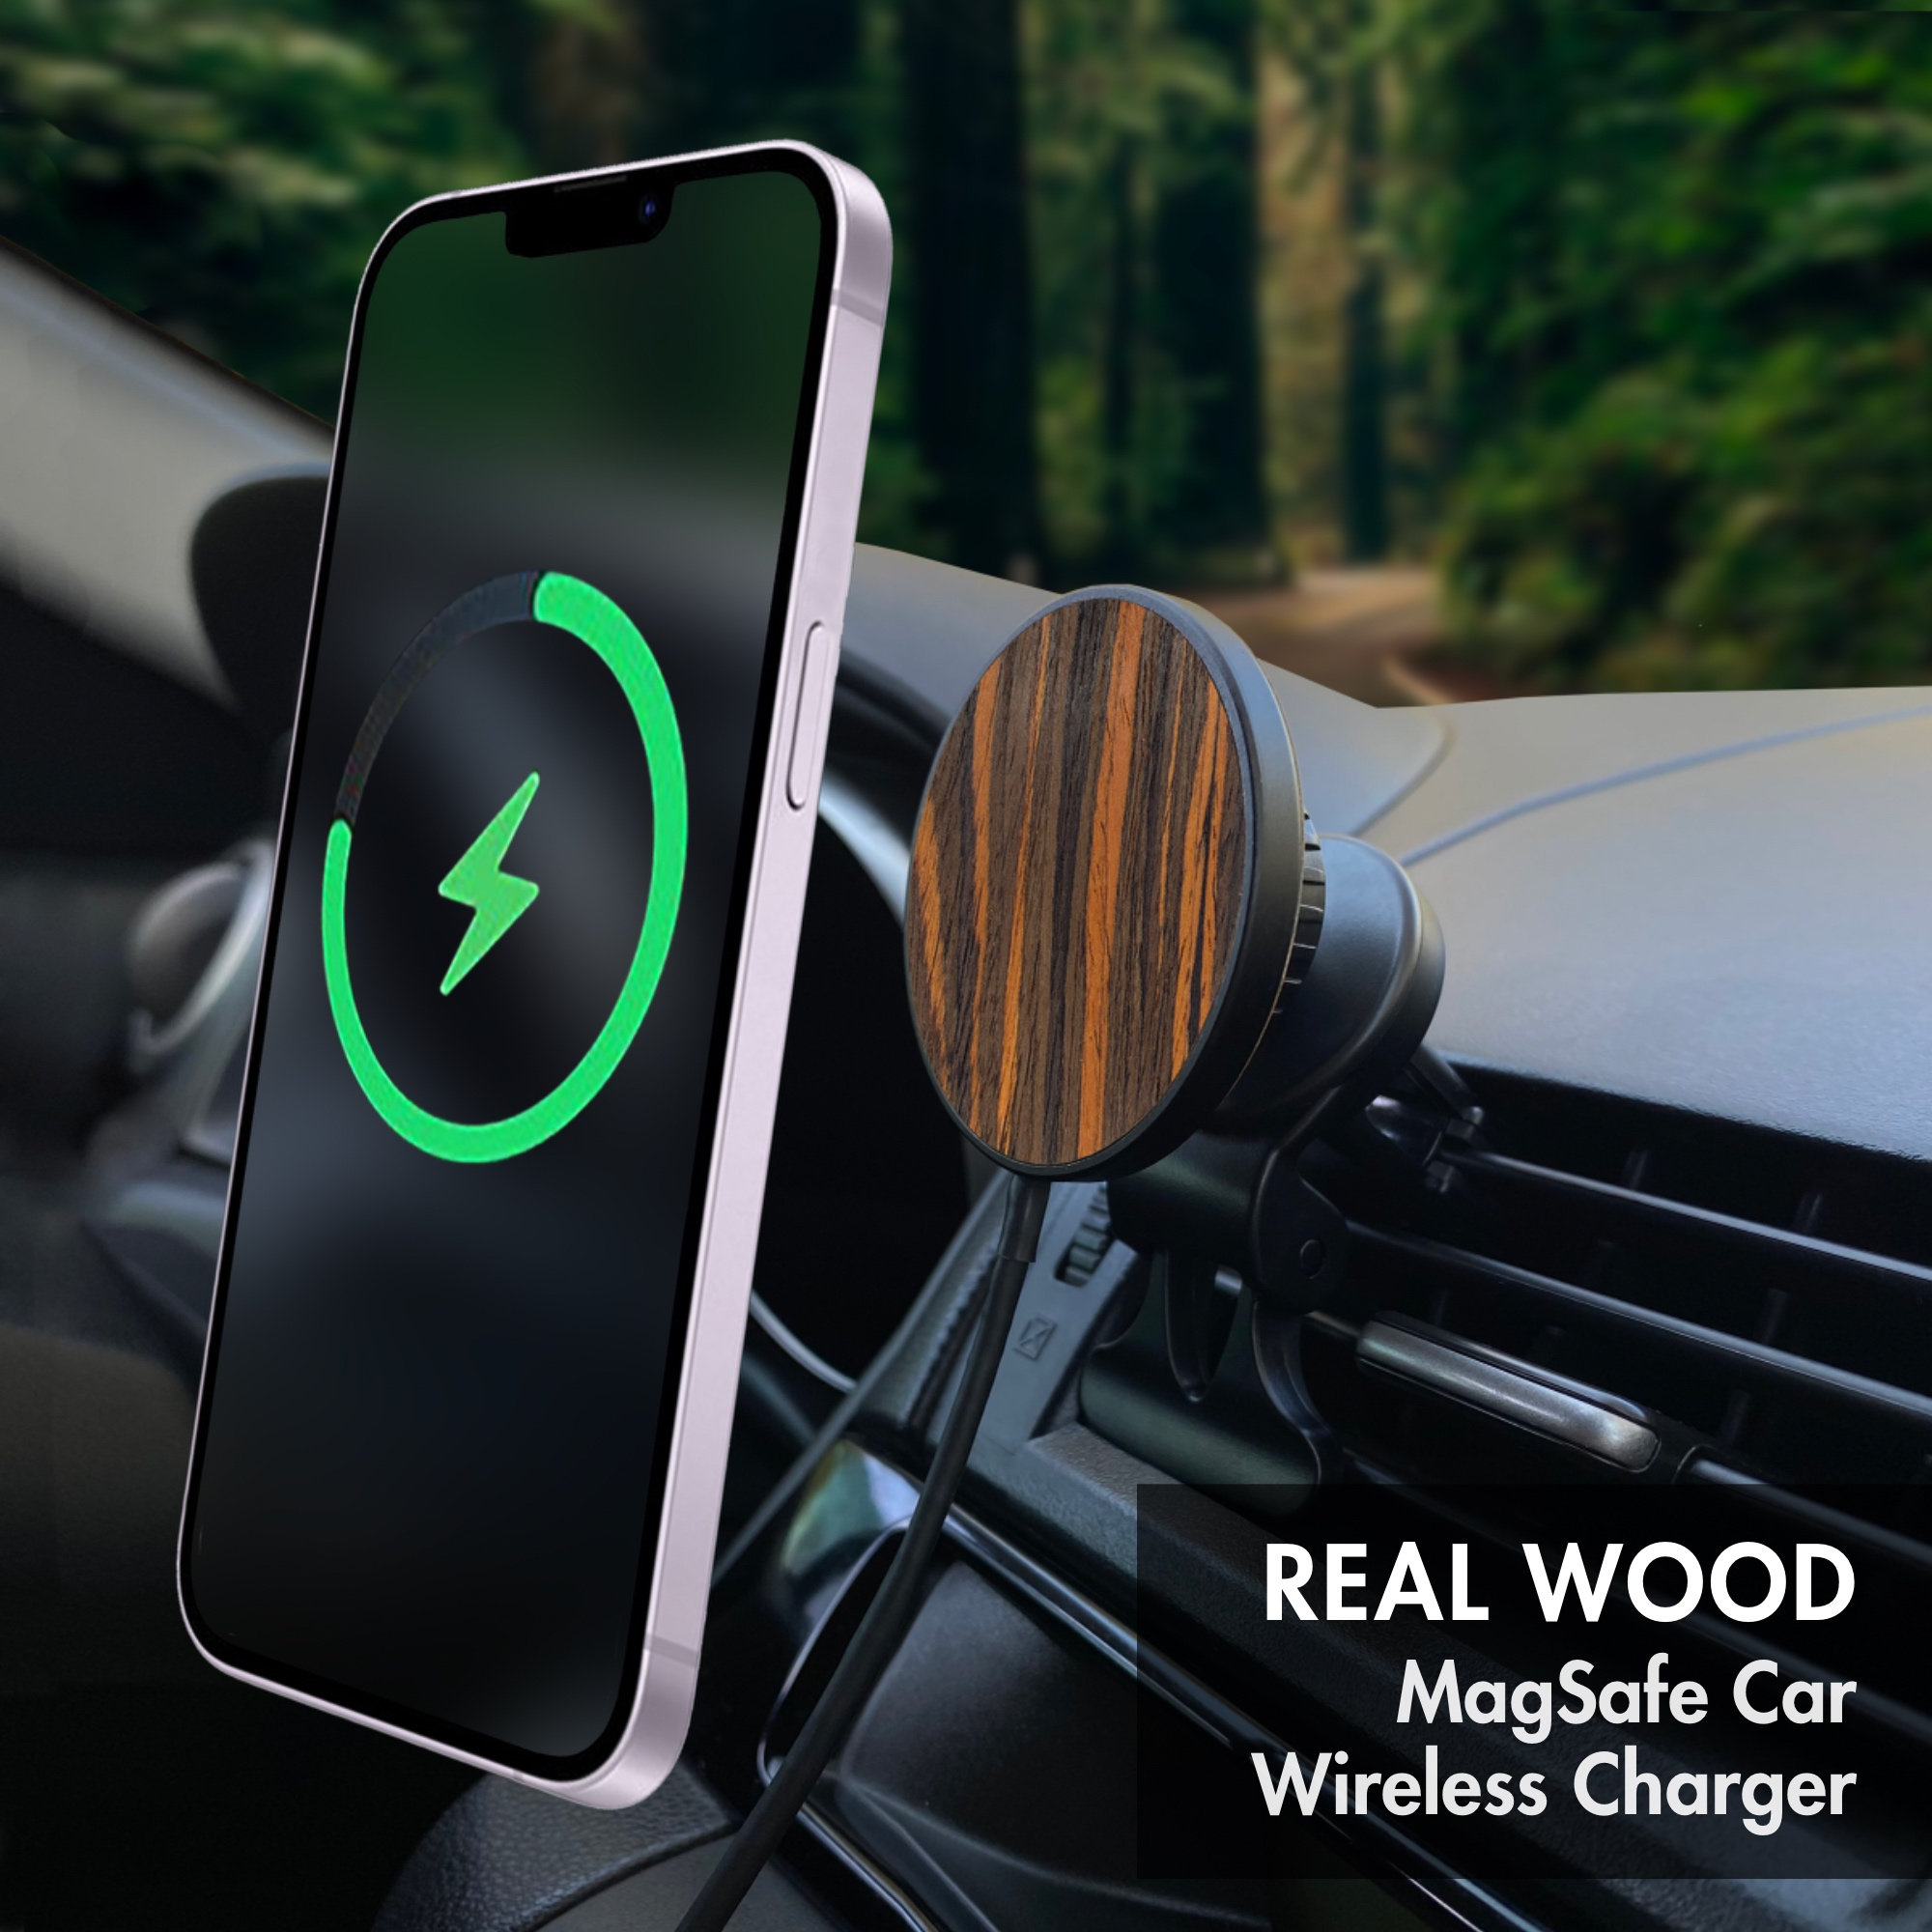 Buy Wireless Car Charger Online In India -  India